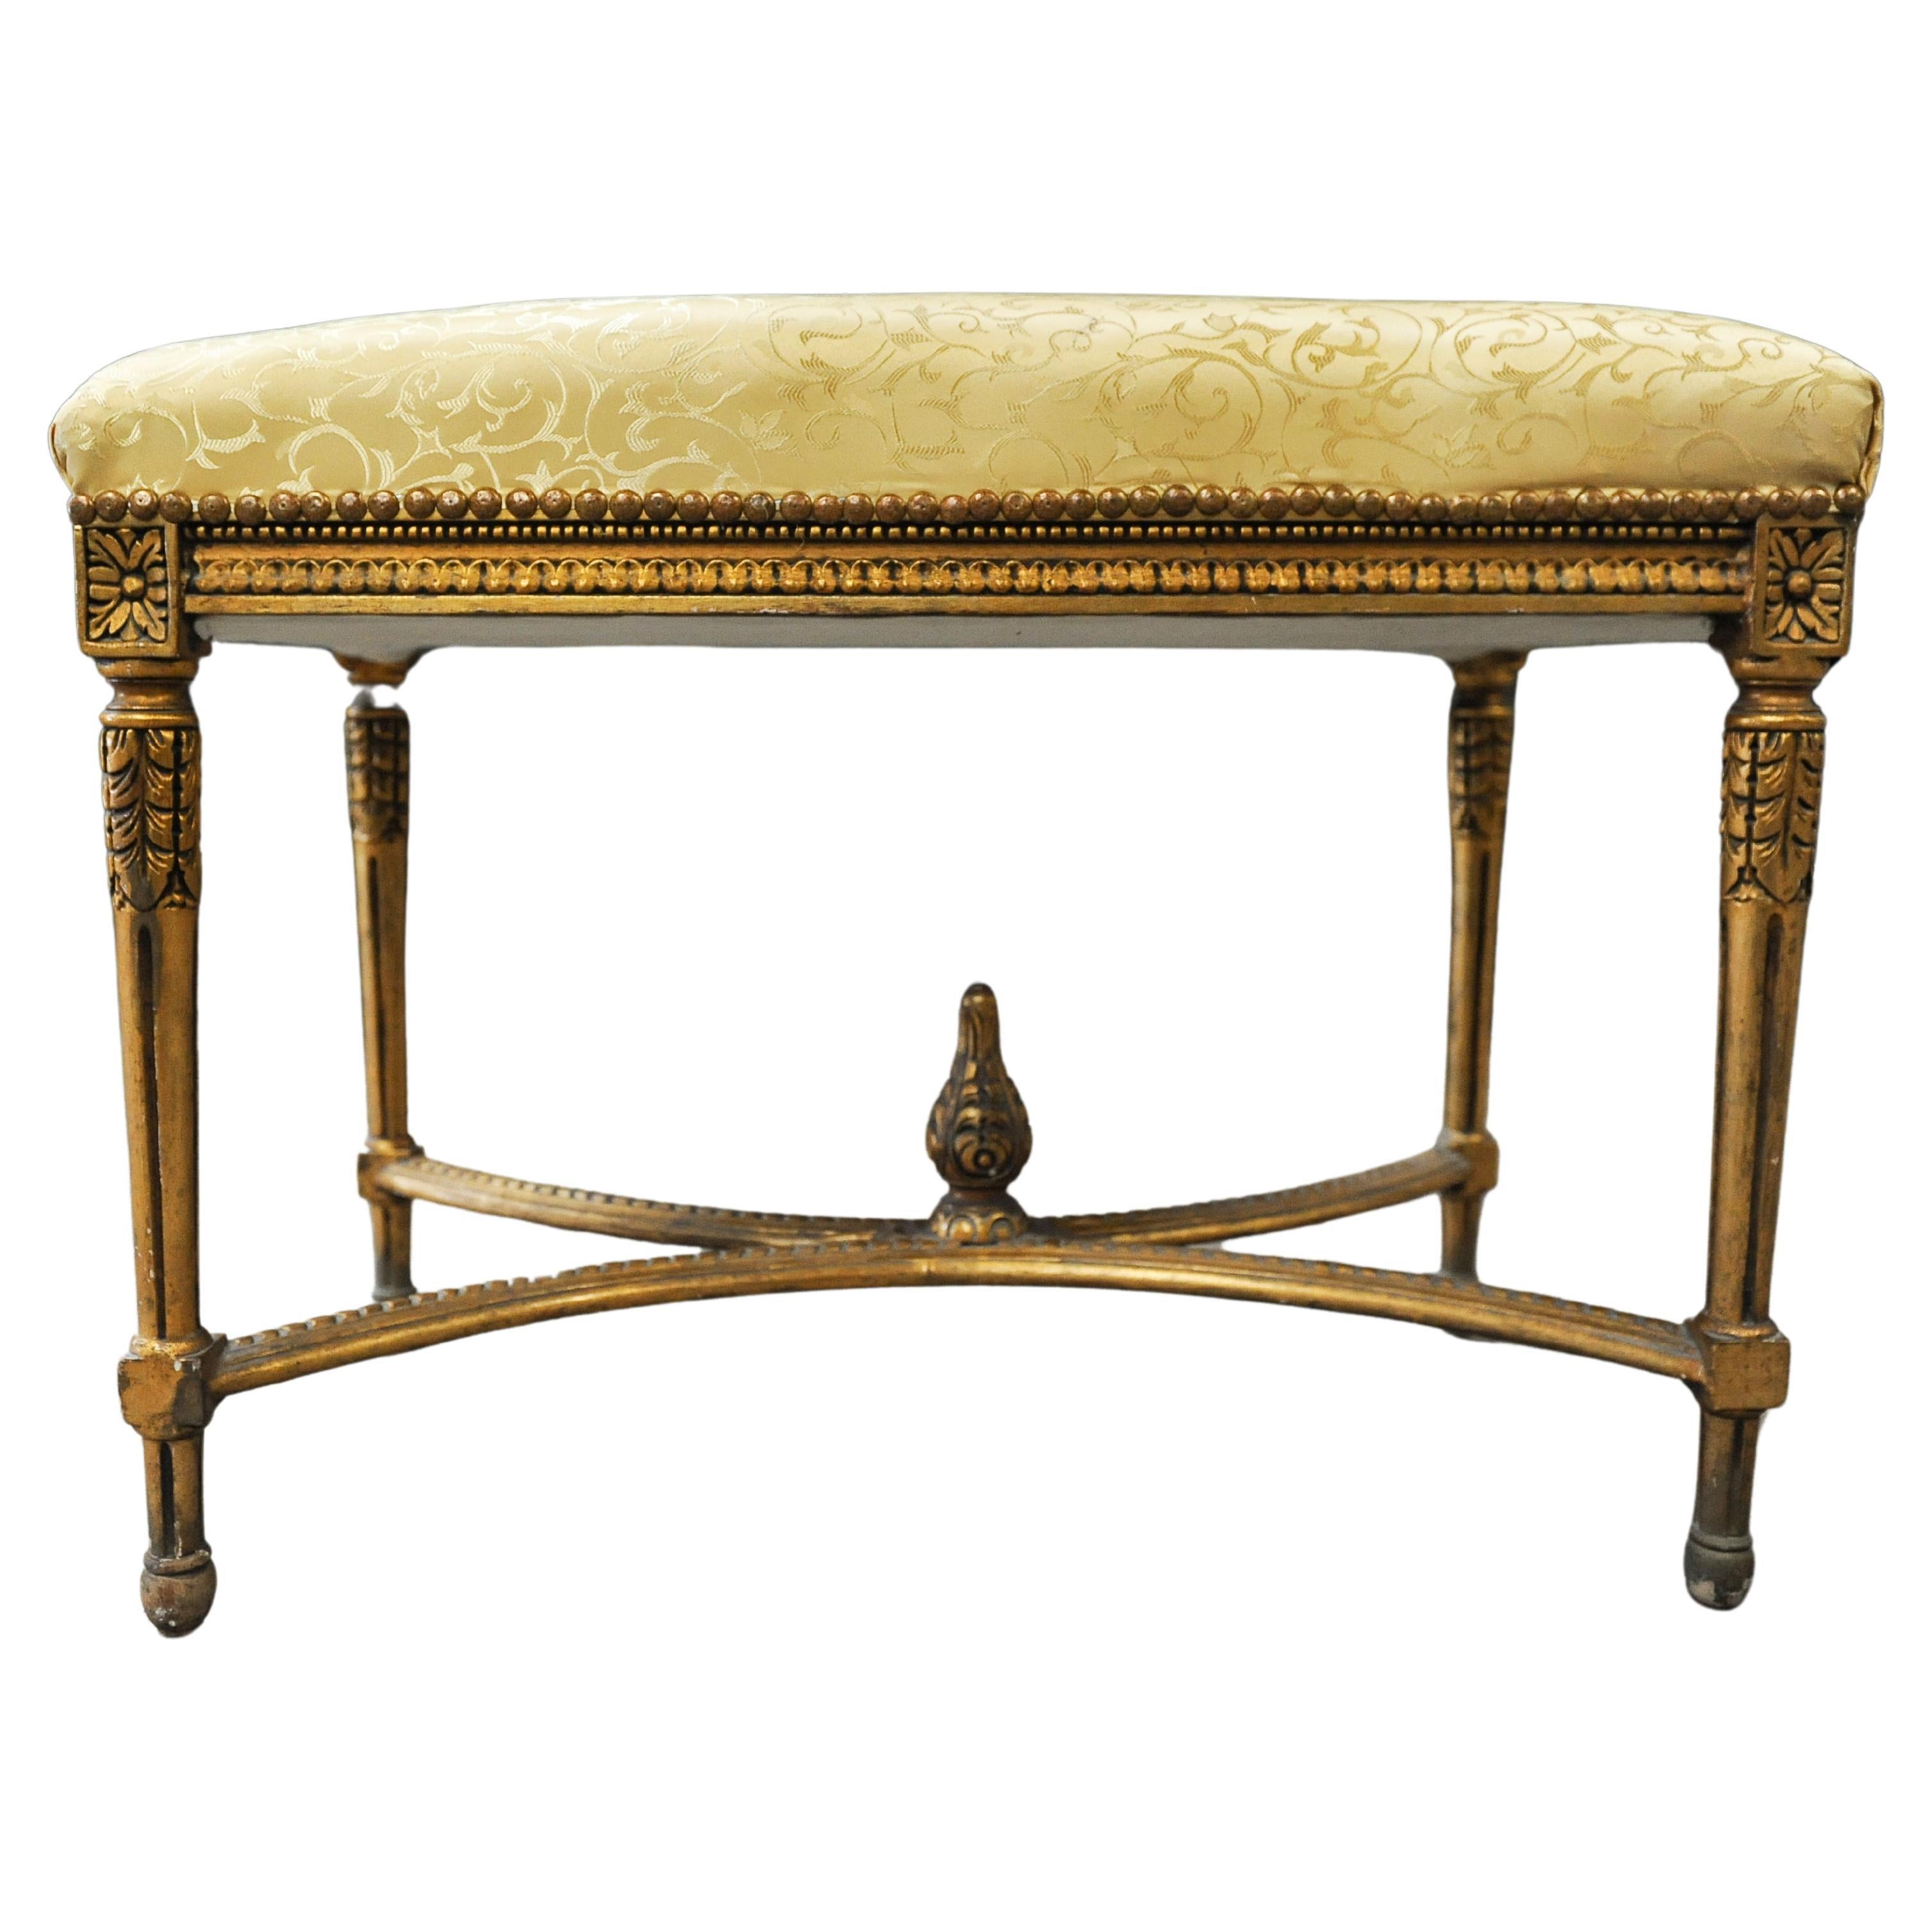 19th Century French Gilt Wood Window Seat With Gilt Carved Floral Motifs, With Damask Silk  For Sale